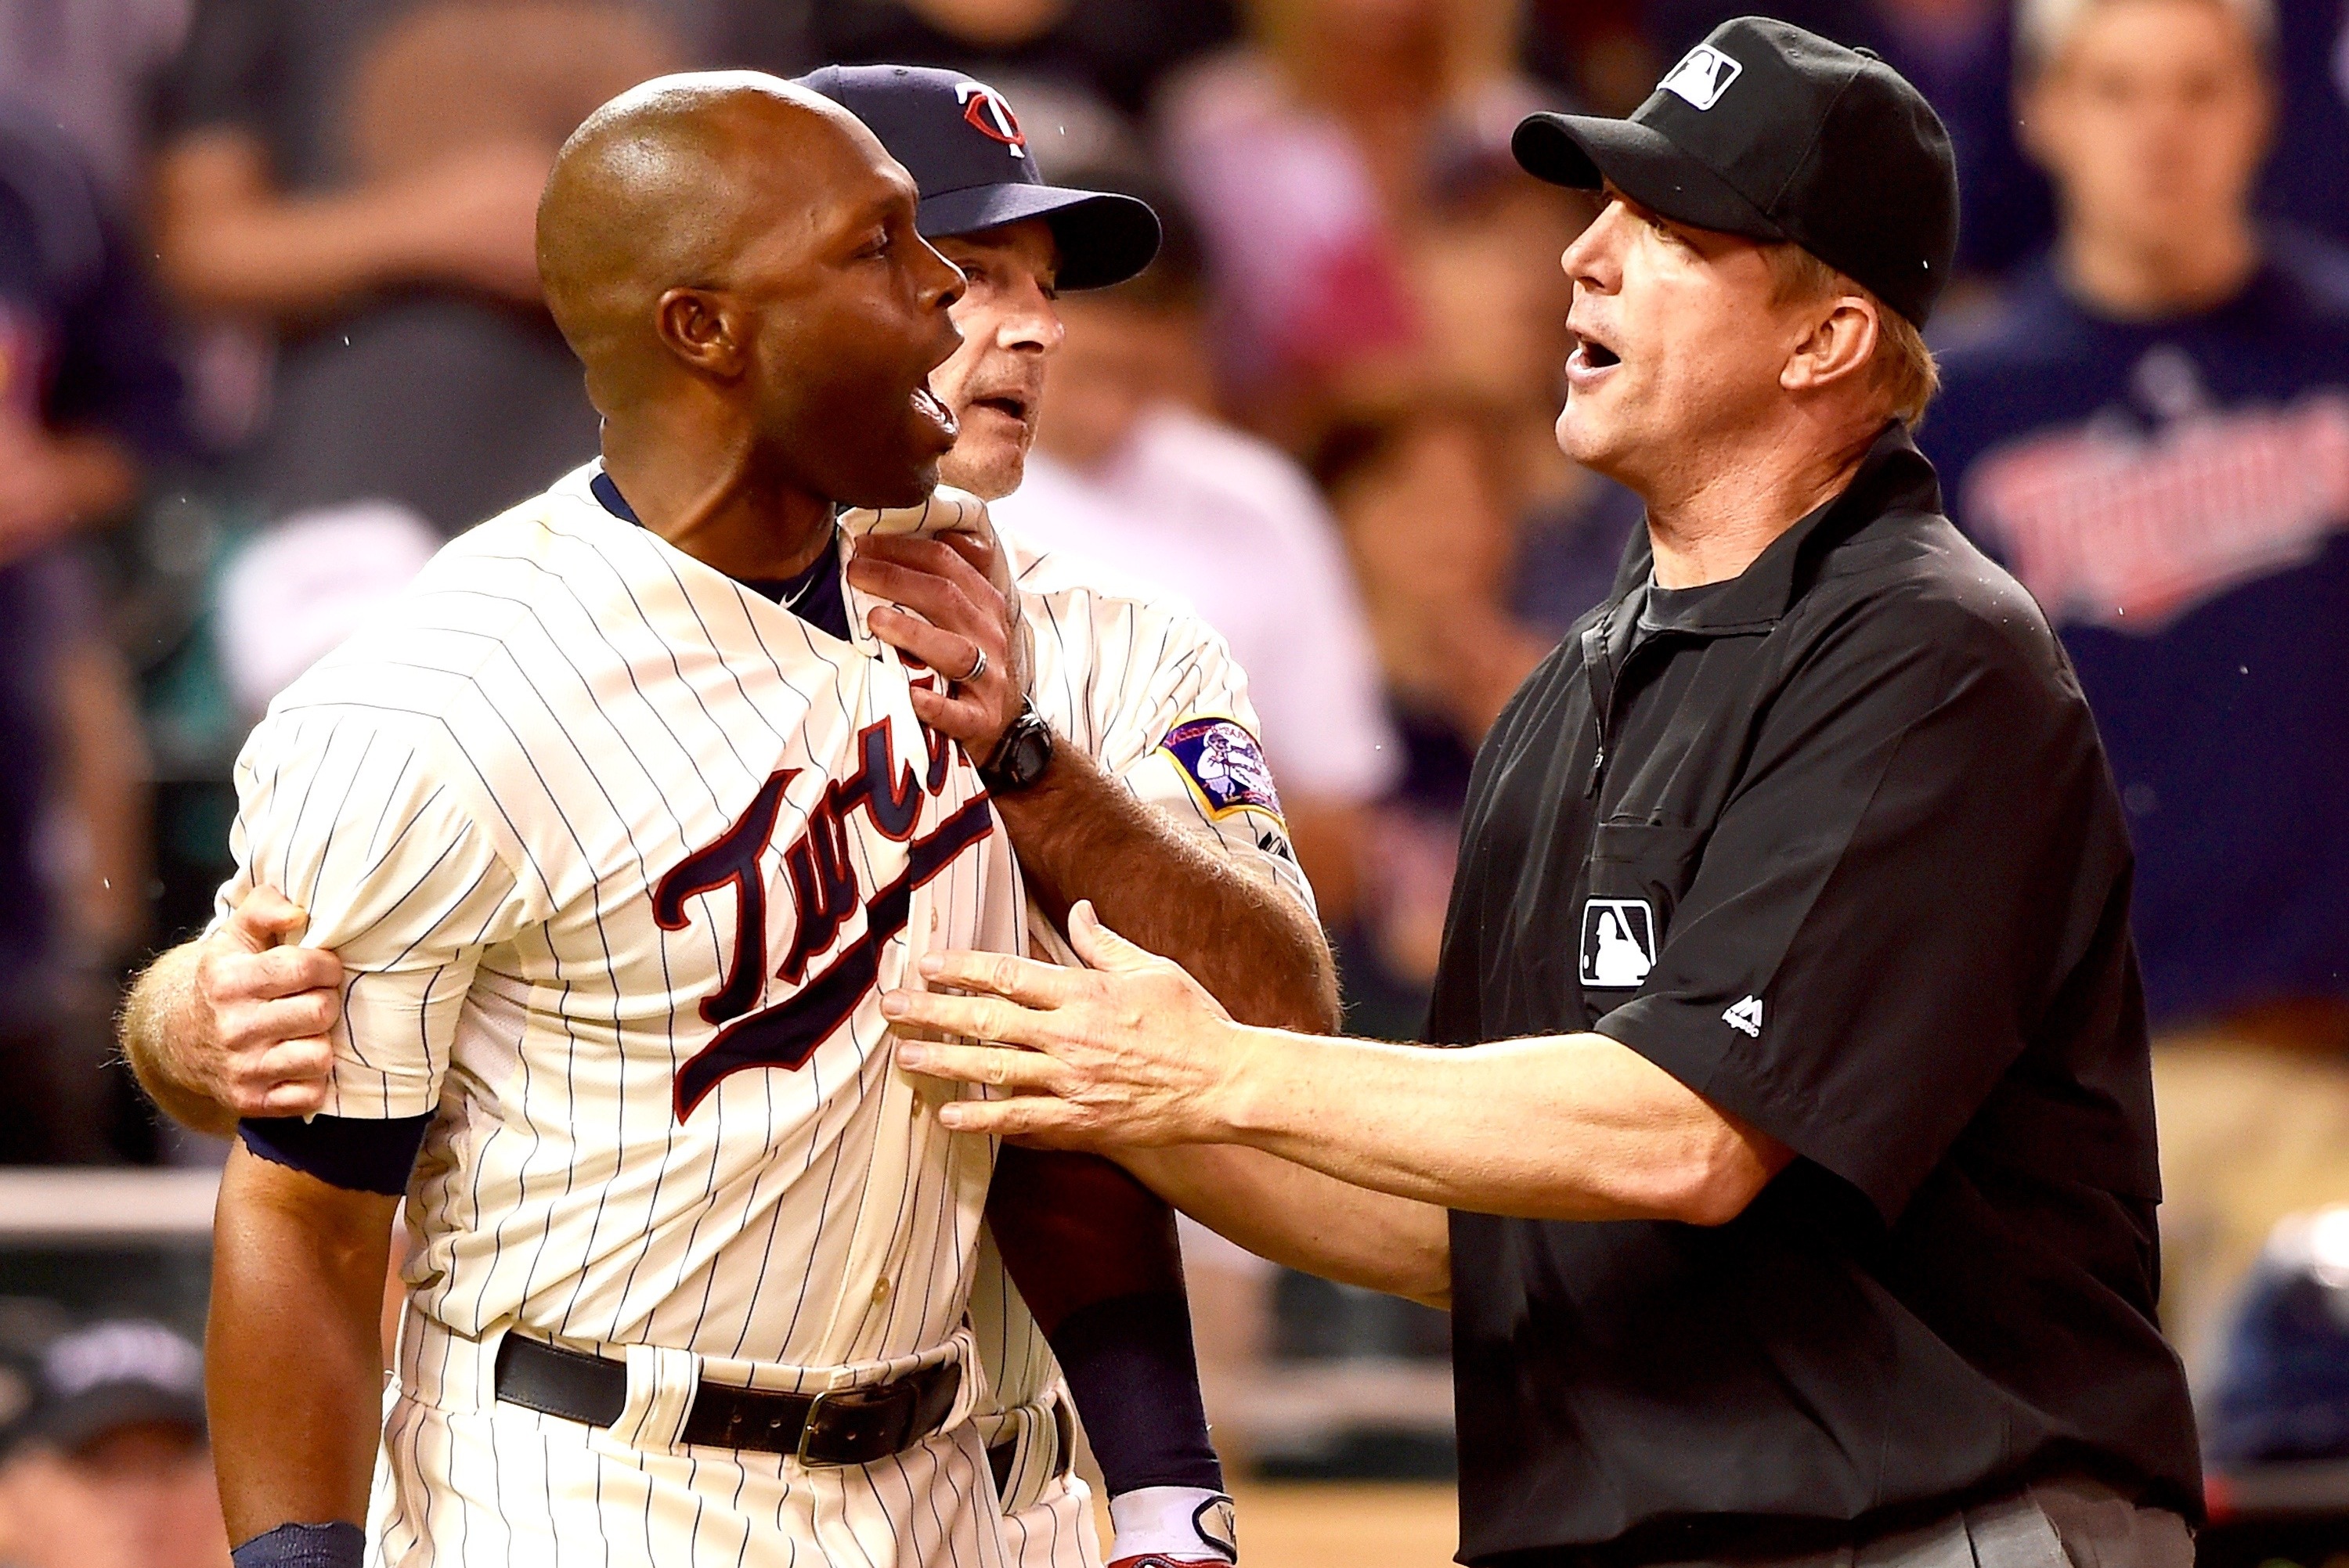 Torii Hunter says umpire was wrong on call that ended loss to